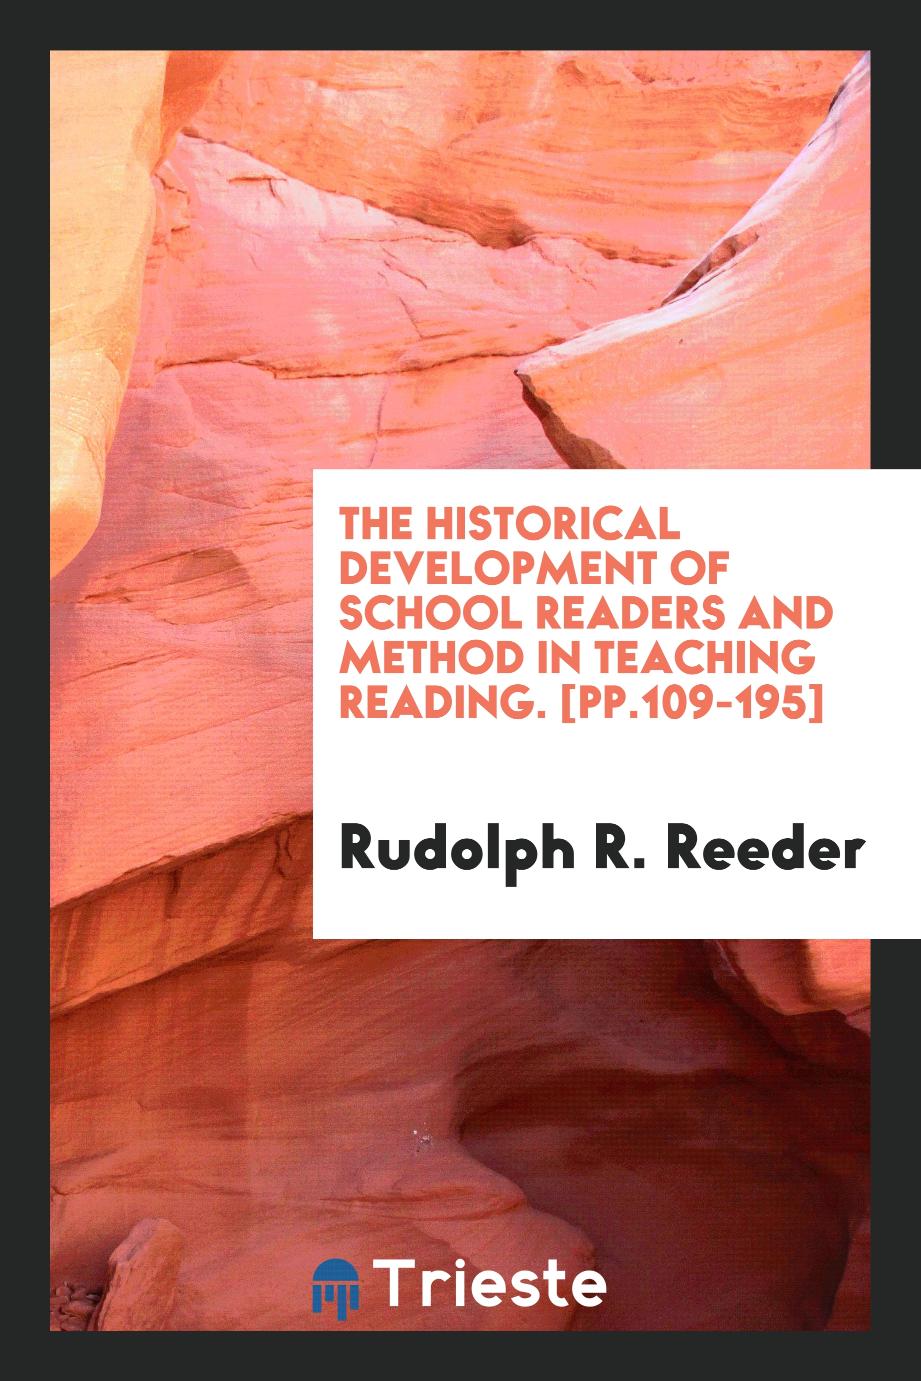 The Historical Development of School Readers and Method in Teaching Reading. [pp.109-195]